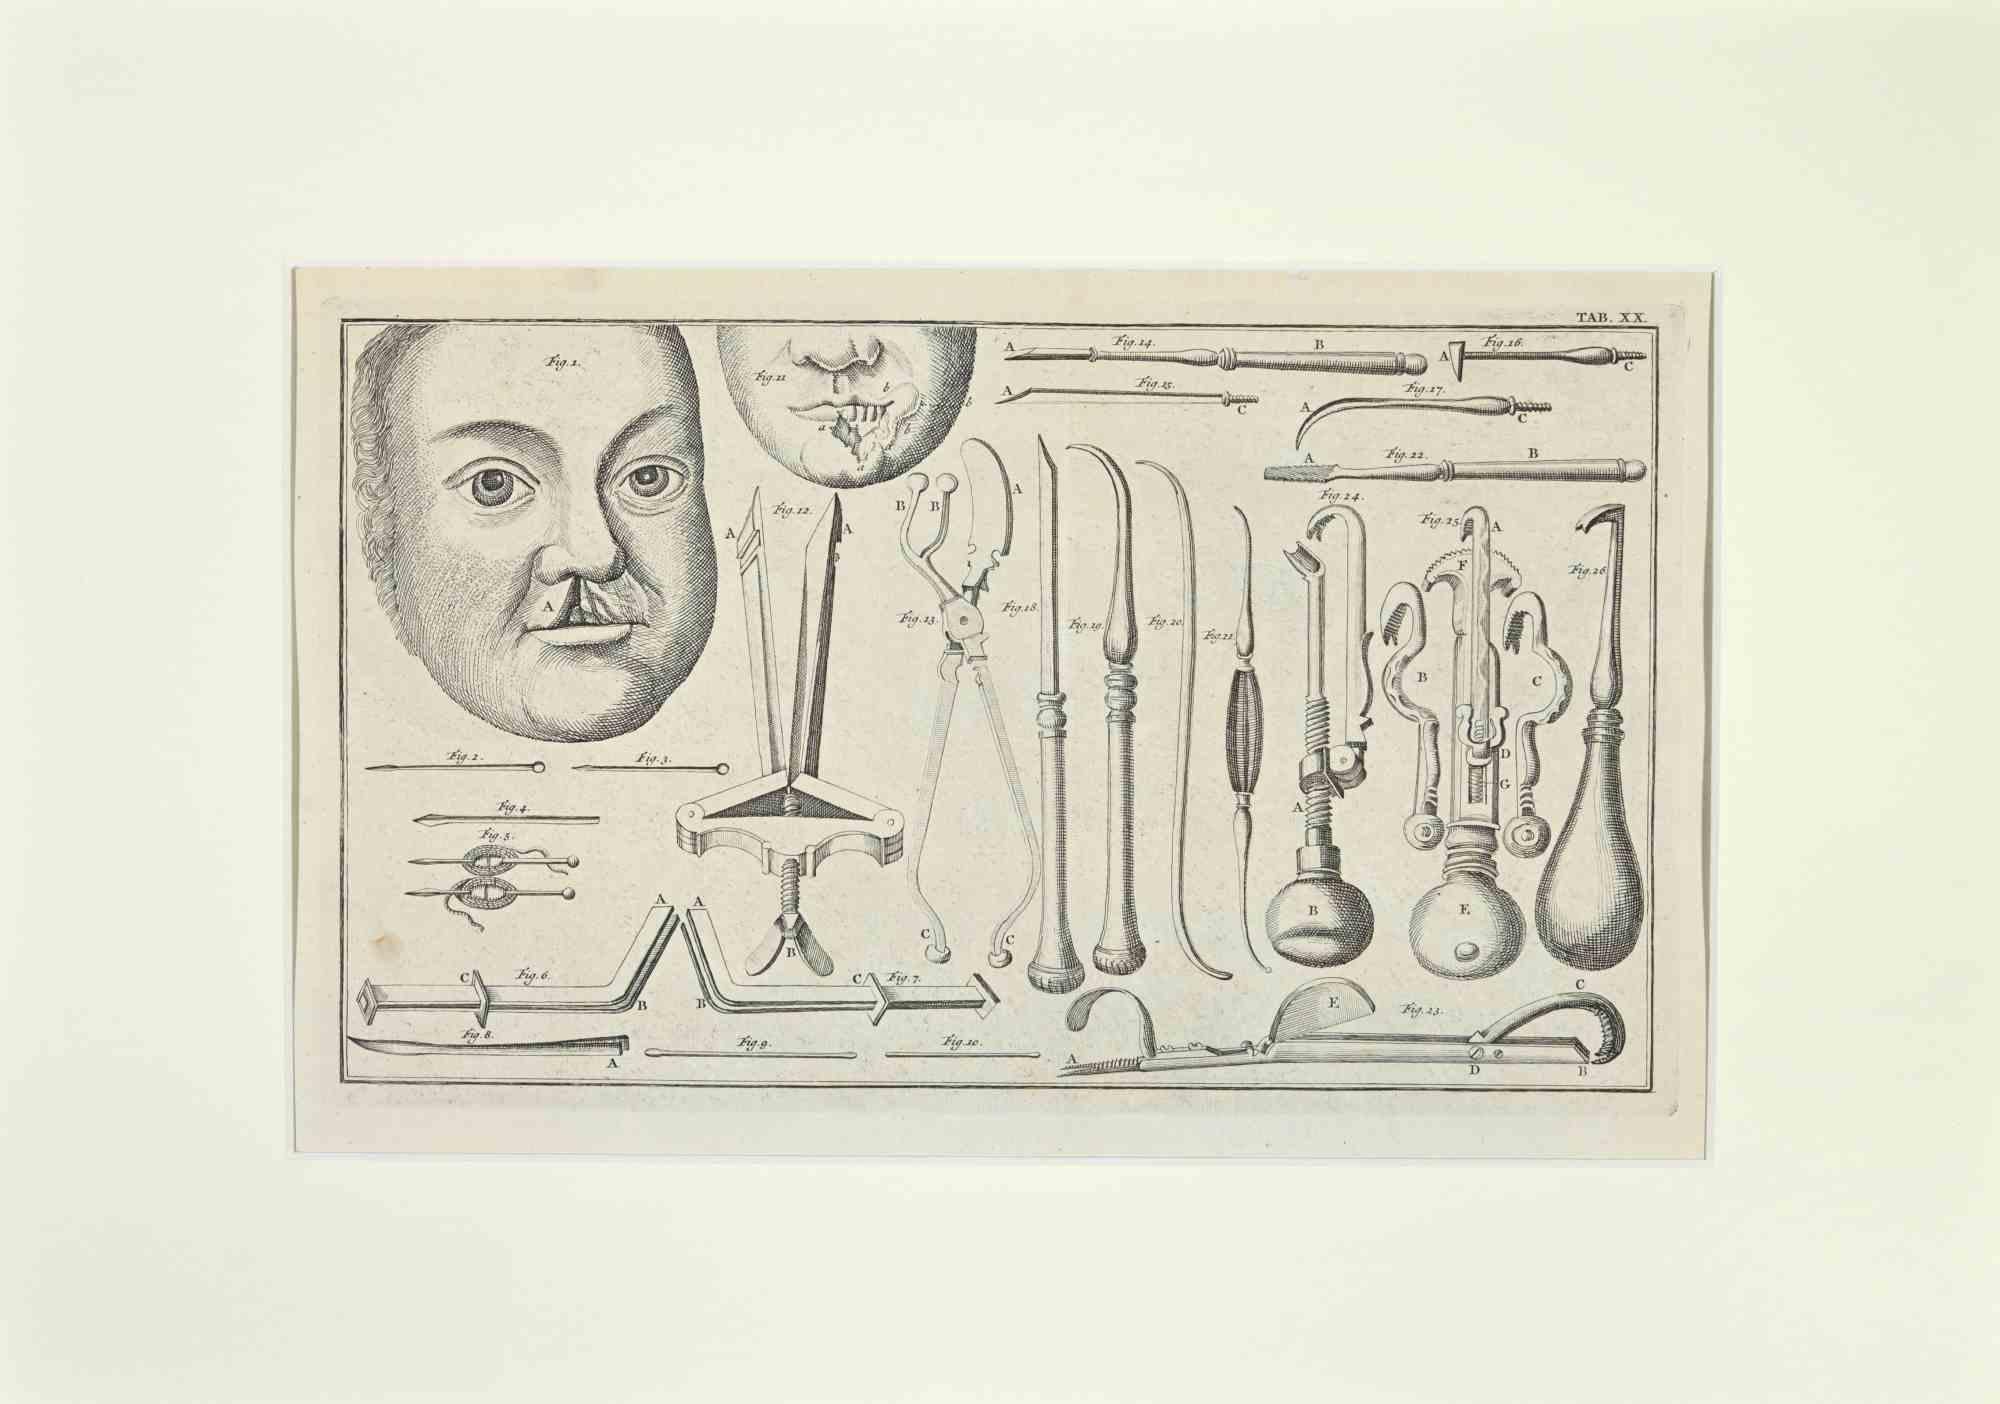 Surgical Instruments is part of the Suite Institutiones Chirurgicae by Lorenz Heister. Amsterdam, Janssonius-Waesberg, 1750.

Etching on paper.

The work belongs to the Latin edition of the famous work by the founder of modern surgery, first